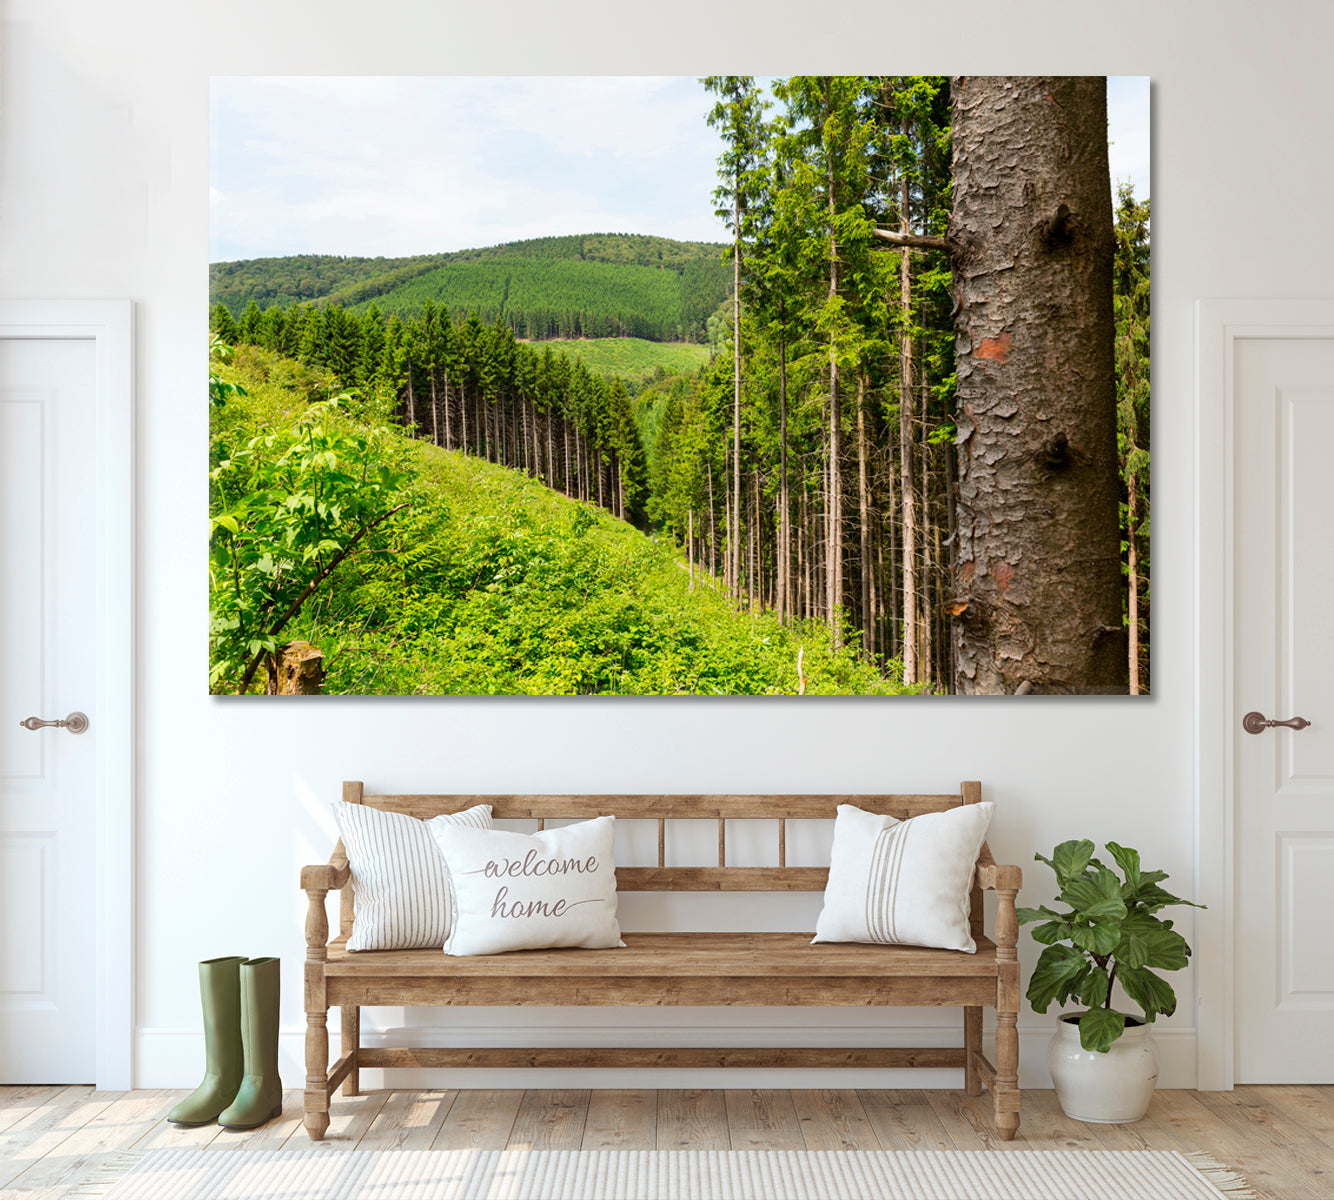 Sauerland Forest Germany Canvas Print ArtLexy 1 Panel 24"x16" inches 